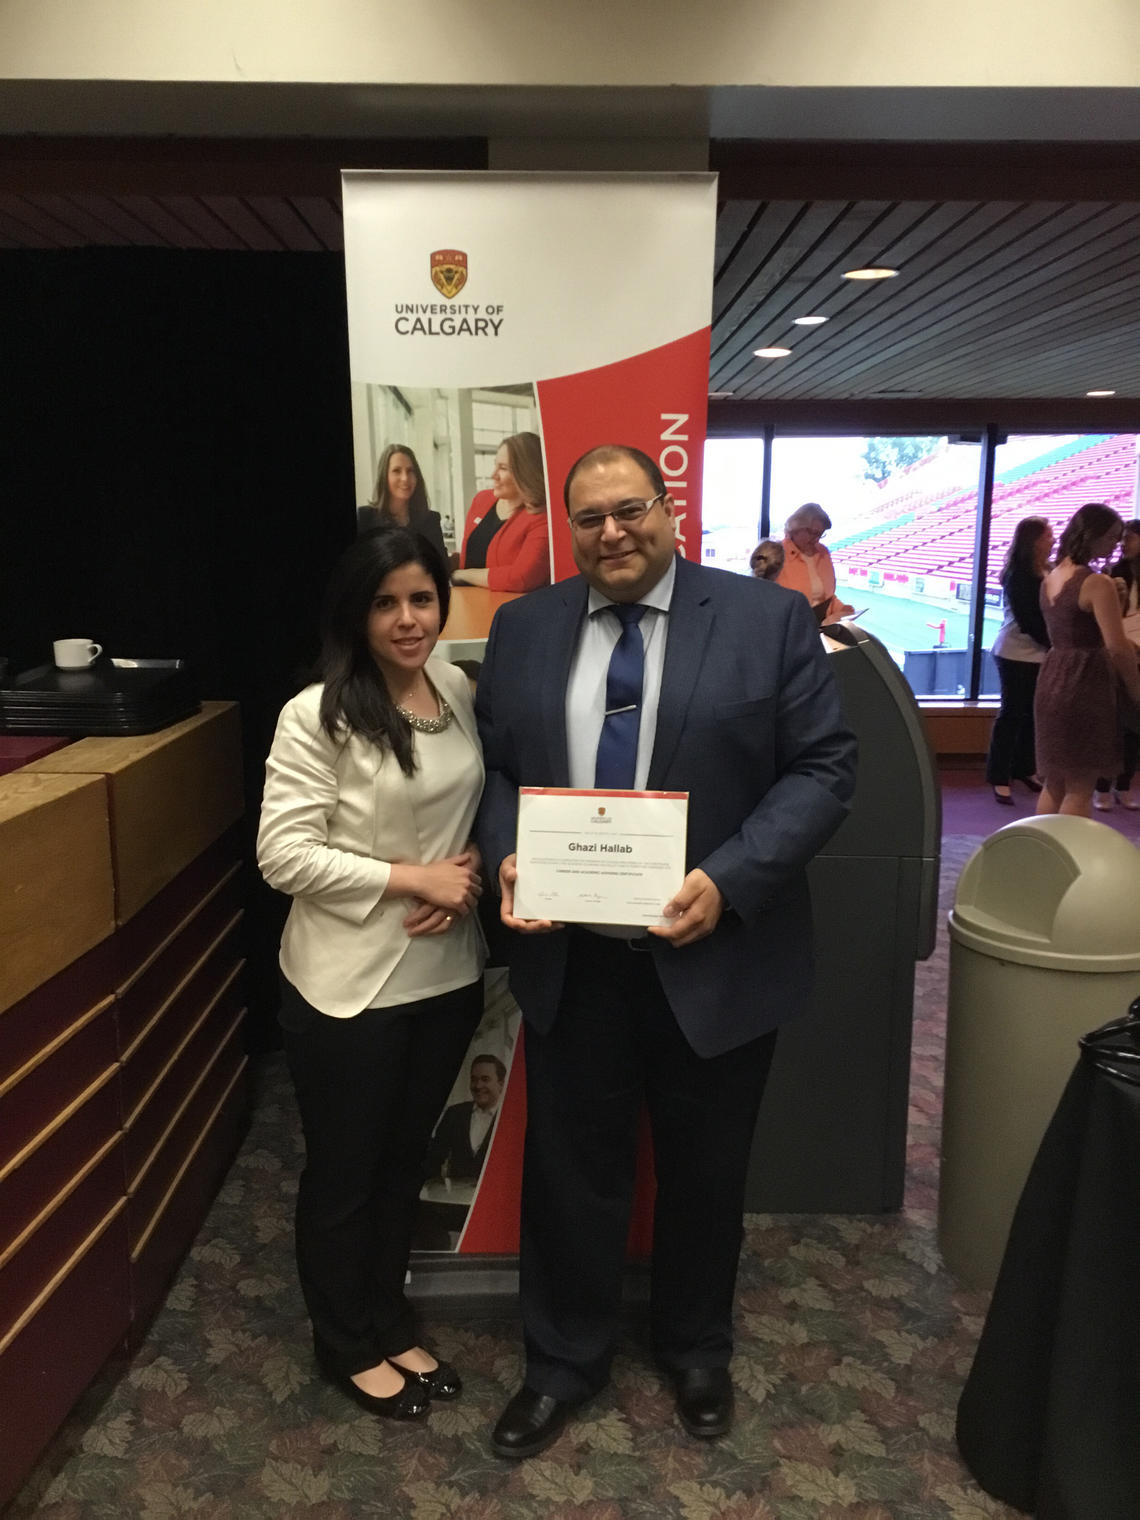 Ghazi Hallab and his wife, Lina, pose with his Continuing Education certificate in career and academic advising.